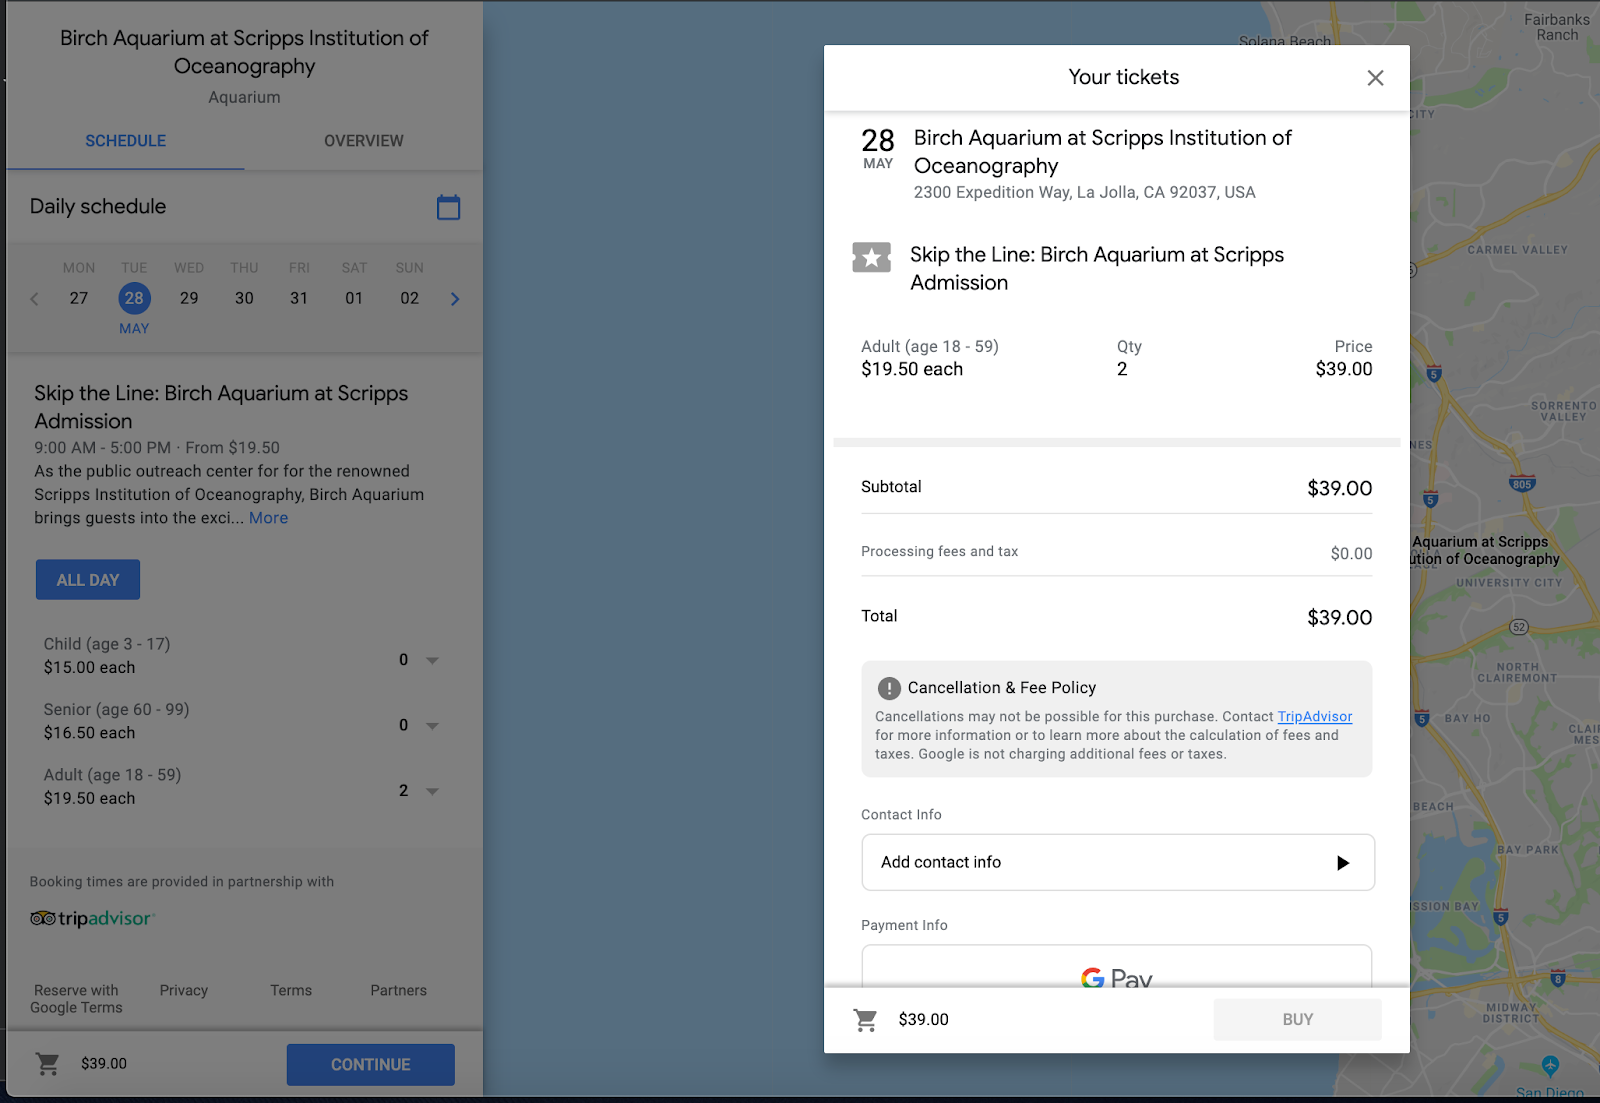 Reserve with Google checkout